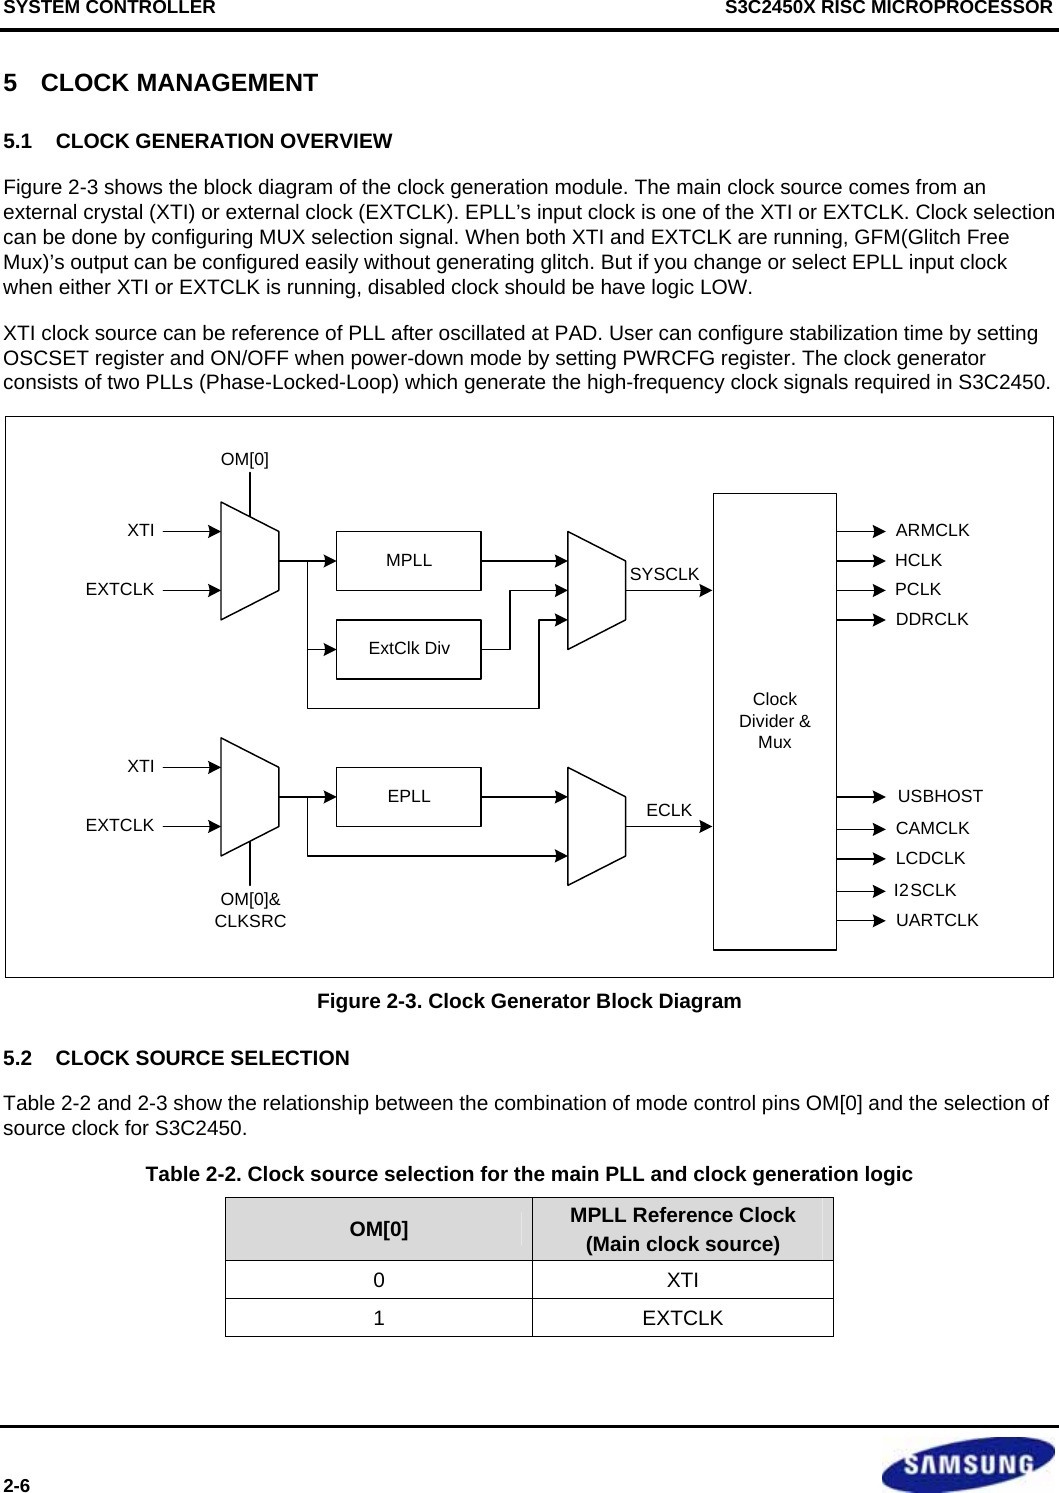 SYSTEM CONTROLLER    S3C2450X RISC MICROPROCESSOR 2-6   5  CLOCK MANAGEMENT 5.1  CLOCK GENERATION OVERVIEW Figure 2-3 shows the block diagram of the clock generation module. The main clock source comes from an external crystal (XTI) or external clock (EXTCLK). EPLL’s input clock is one of the XTI or EXTCLK. Clock selection can be done by configuring MUX selection signal. When both XTI and EXTCLK are running, GFM(Glitch Free Mux)’s output can be configured easily without generating glitch. But if you change or select EPLL input clock when either XTI or EXTCLK is running, disabled clock should be have logic LOW.  XTI clock source can be reference of PLL after oscillated at PAD. User can configure stabilization time by setting OSCSET register and ON/OFF when power-down mode by setting PWRCFG register. The clock generator consists of two PLLs (Phase-Locked-Loop) which generate the high-frequency clock signals required in S3C2450.   MPLLExtClk DivXTIEXTCLKOM[0]ARMCLKHCLKPCLKDDRCLKSYSCLKEPLLXTIEXTCLK ECLK USBHOSTCAMCLKI2SCLKUARTCLKLCDCLKOM[0]&amp;CLKSRCClock Divider &amp;Mux   Figure 2-3. Clock Generator Block Diagram 5.2  CLOCK SOURCE SELECTION Table 2-2 and 2-3 show the relationship between the combination of mode control pins OM[0] and the selection of source clock for S3C2450. Table 2-2. Clock source selection for the main PLL and clock generation logic OM[0]  MPLL Reference Clock (Main clock source) 0 XTI 1 EXTCLK  